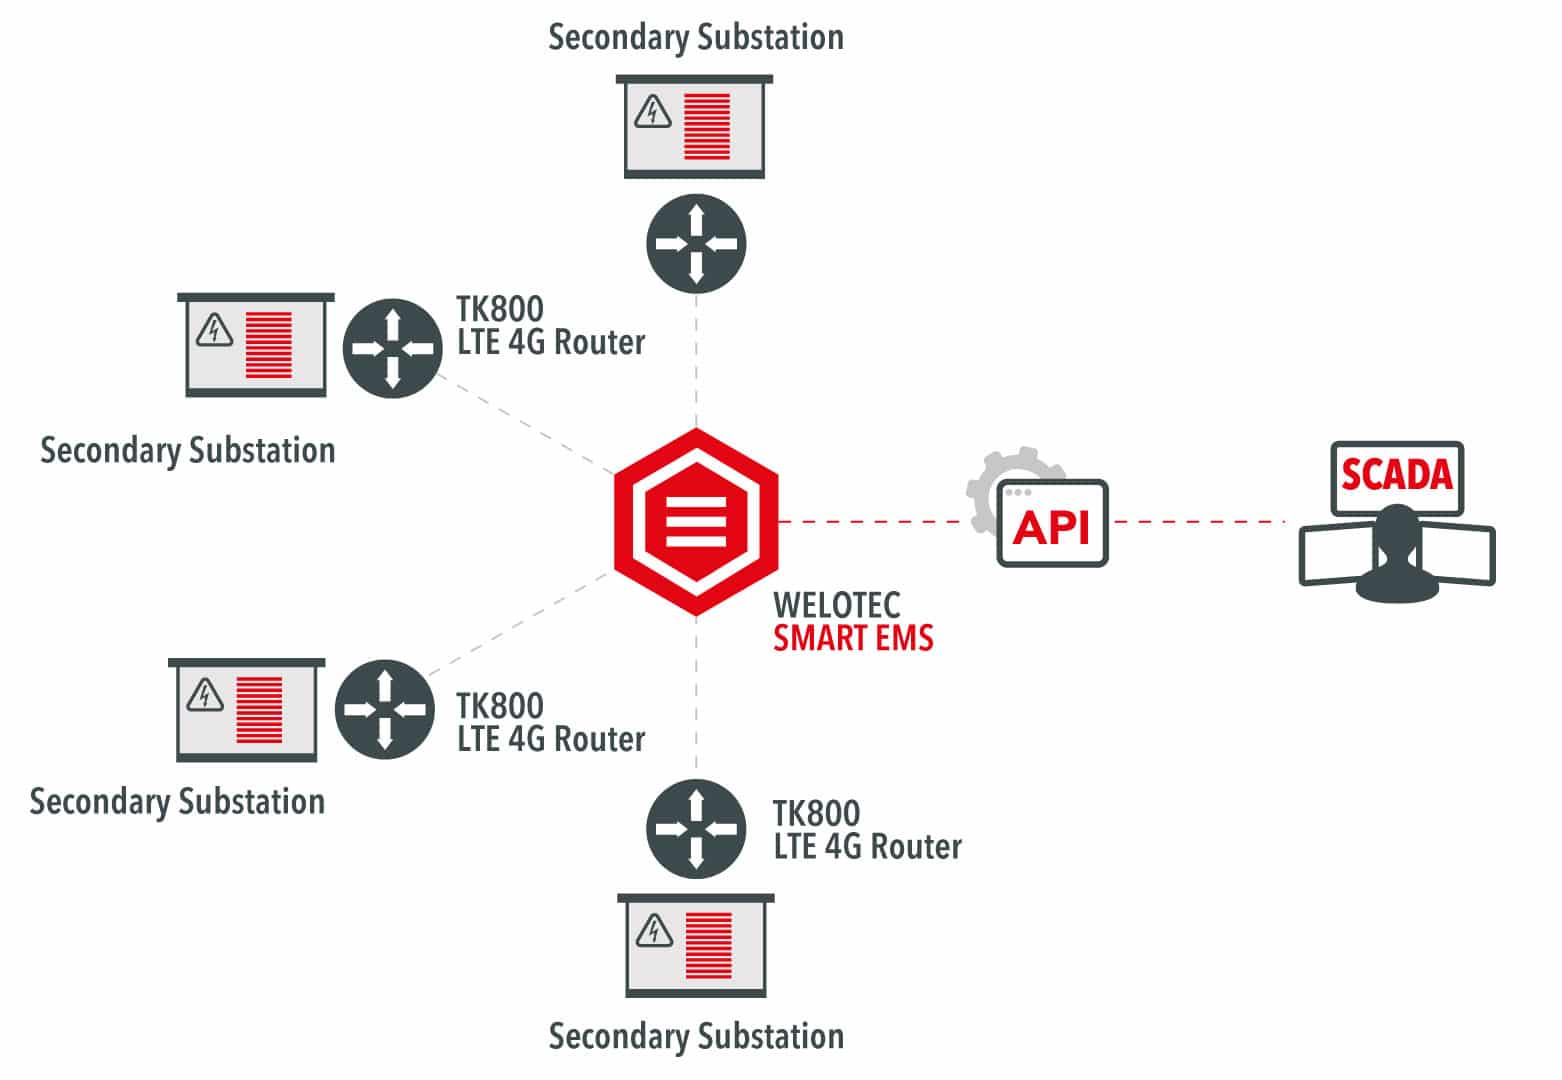 Deployment of 4G LTE Routers with SMART EMS in critical infrastructures